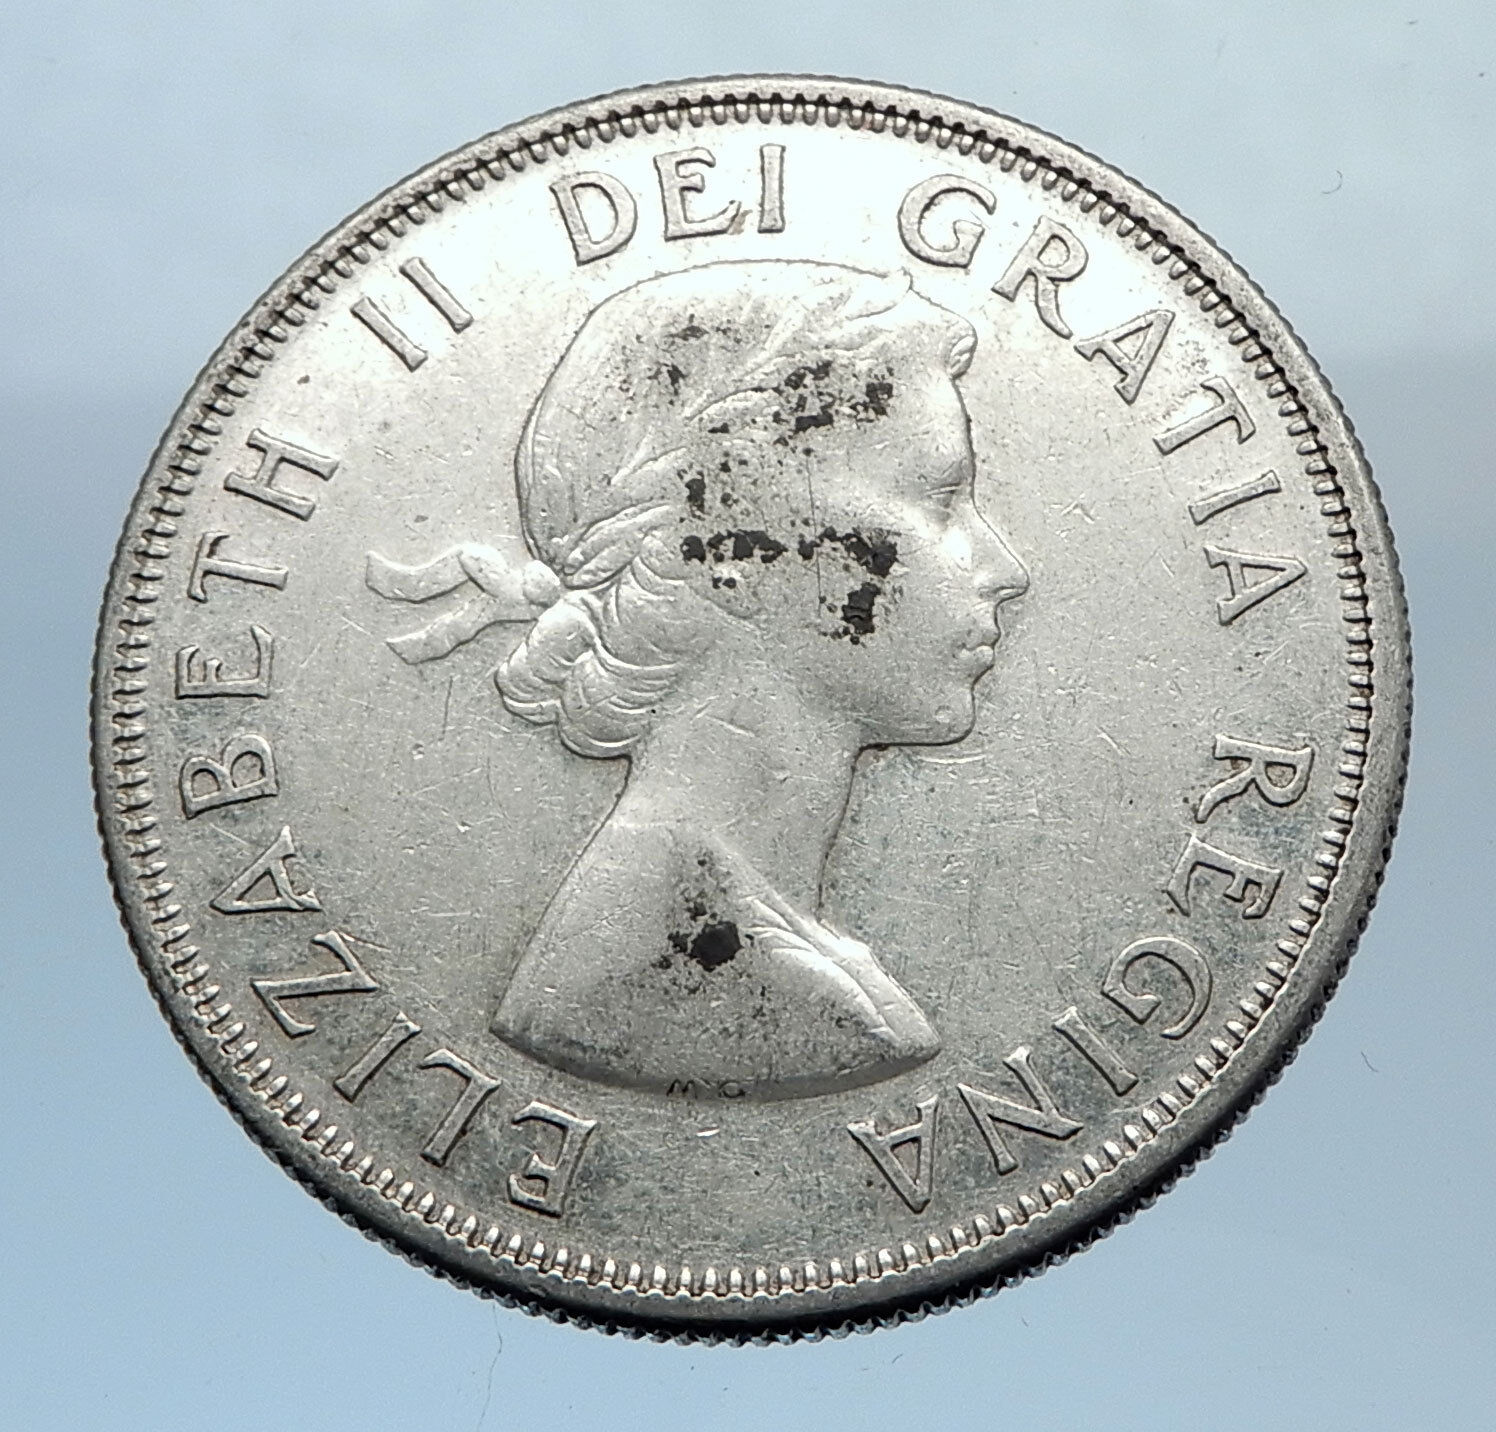 1957 CANADA Large SILVER 50 Cents Coin UK Queen Elizabeth II Coat-of-Arms i71921